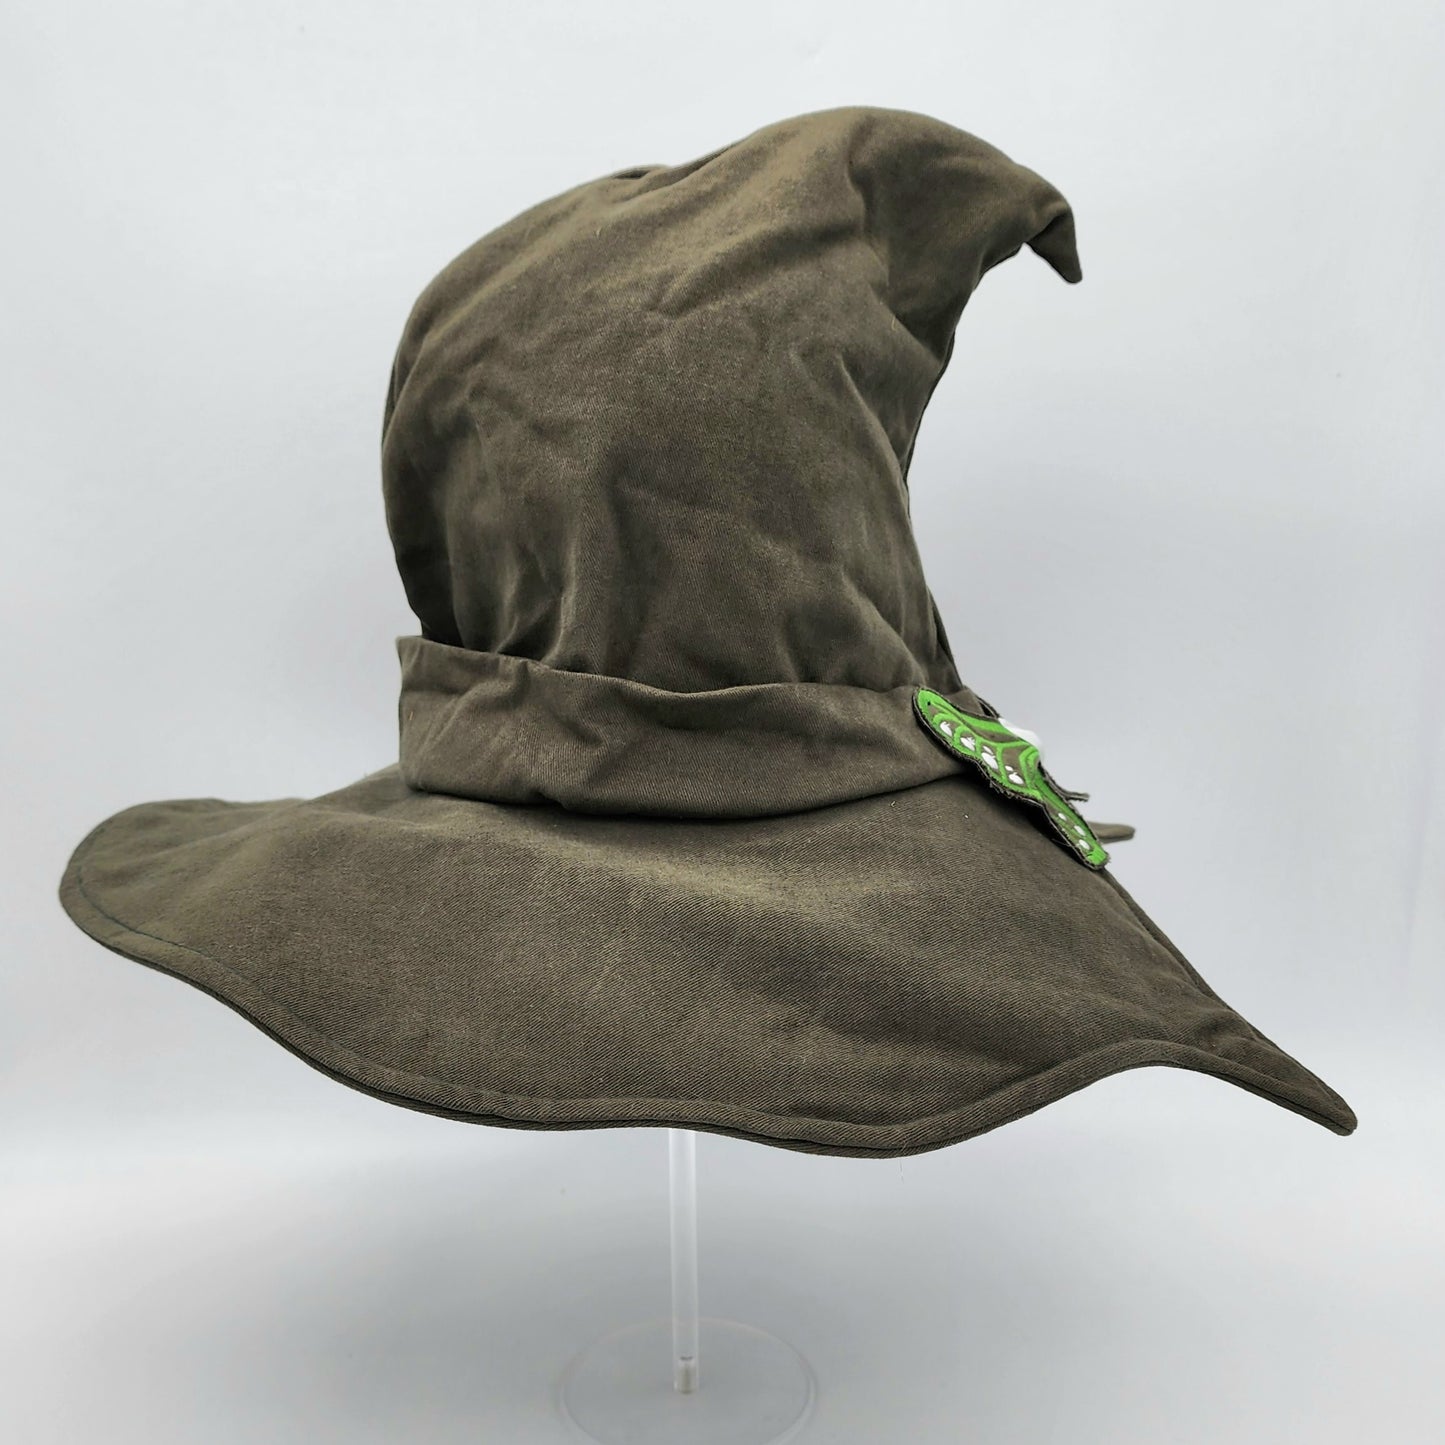 Butterfly Witch Hat- Olive Green with Green and White Embroidery